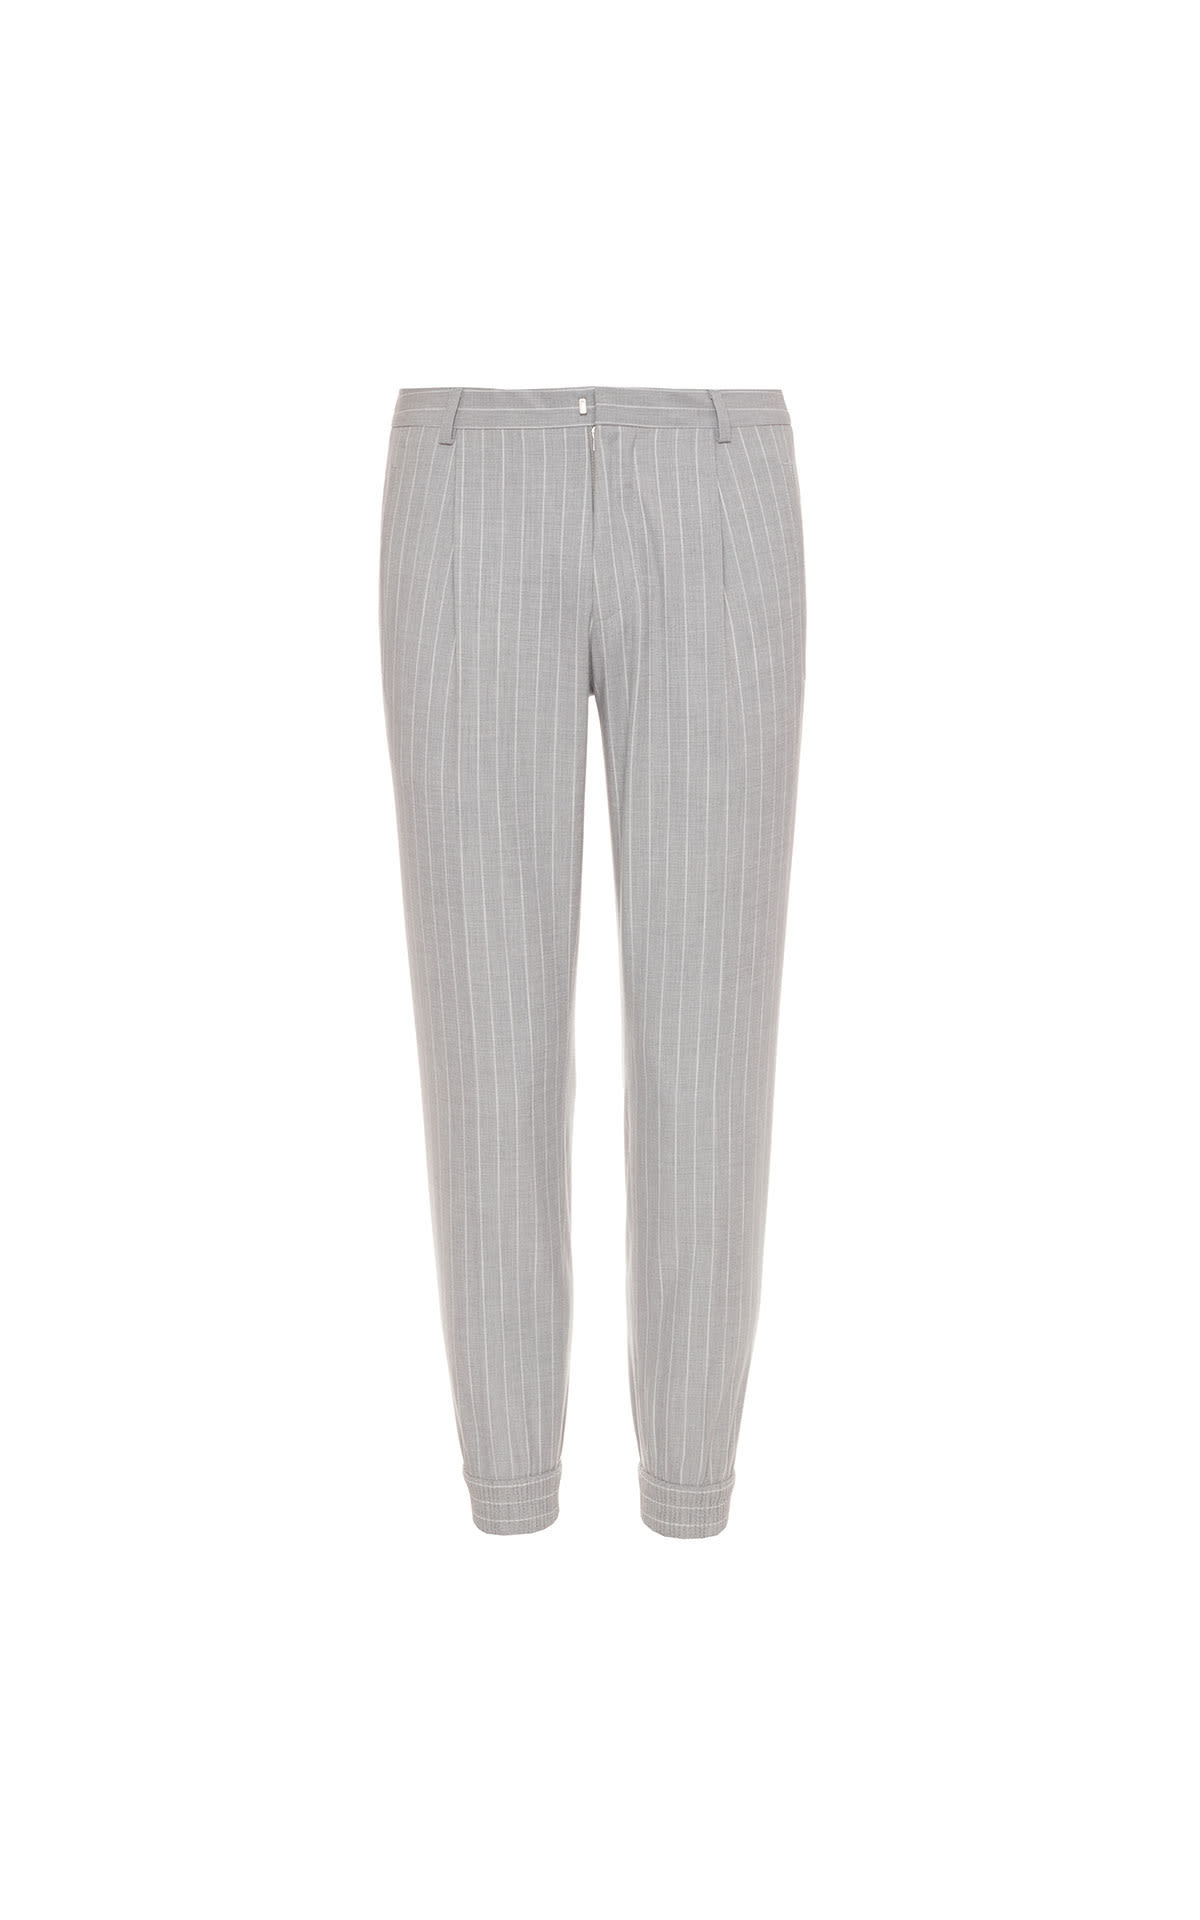 HUGO Casual suit trouser from Bicester Village